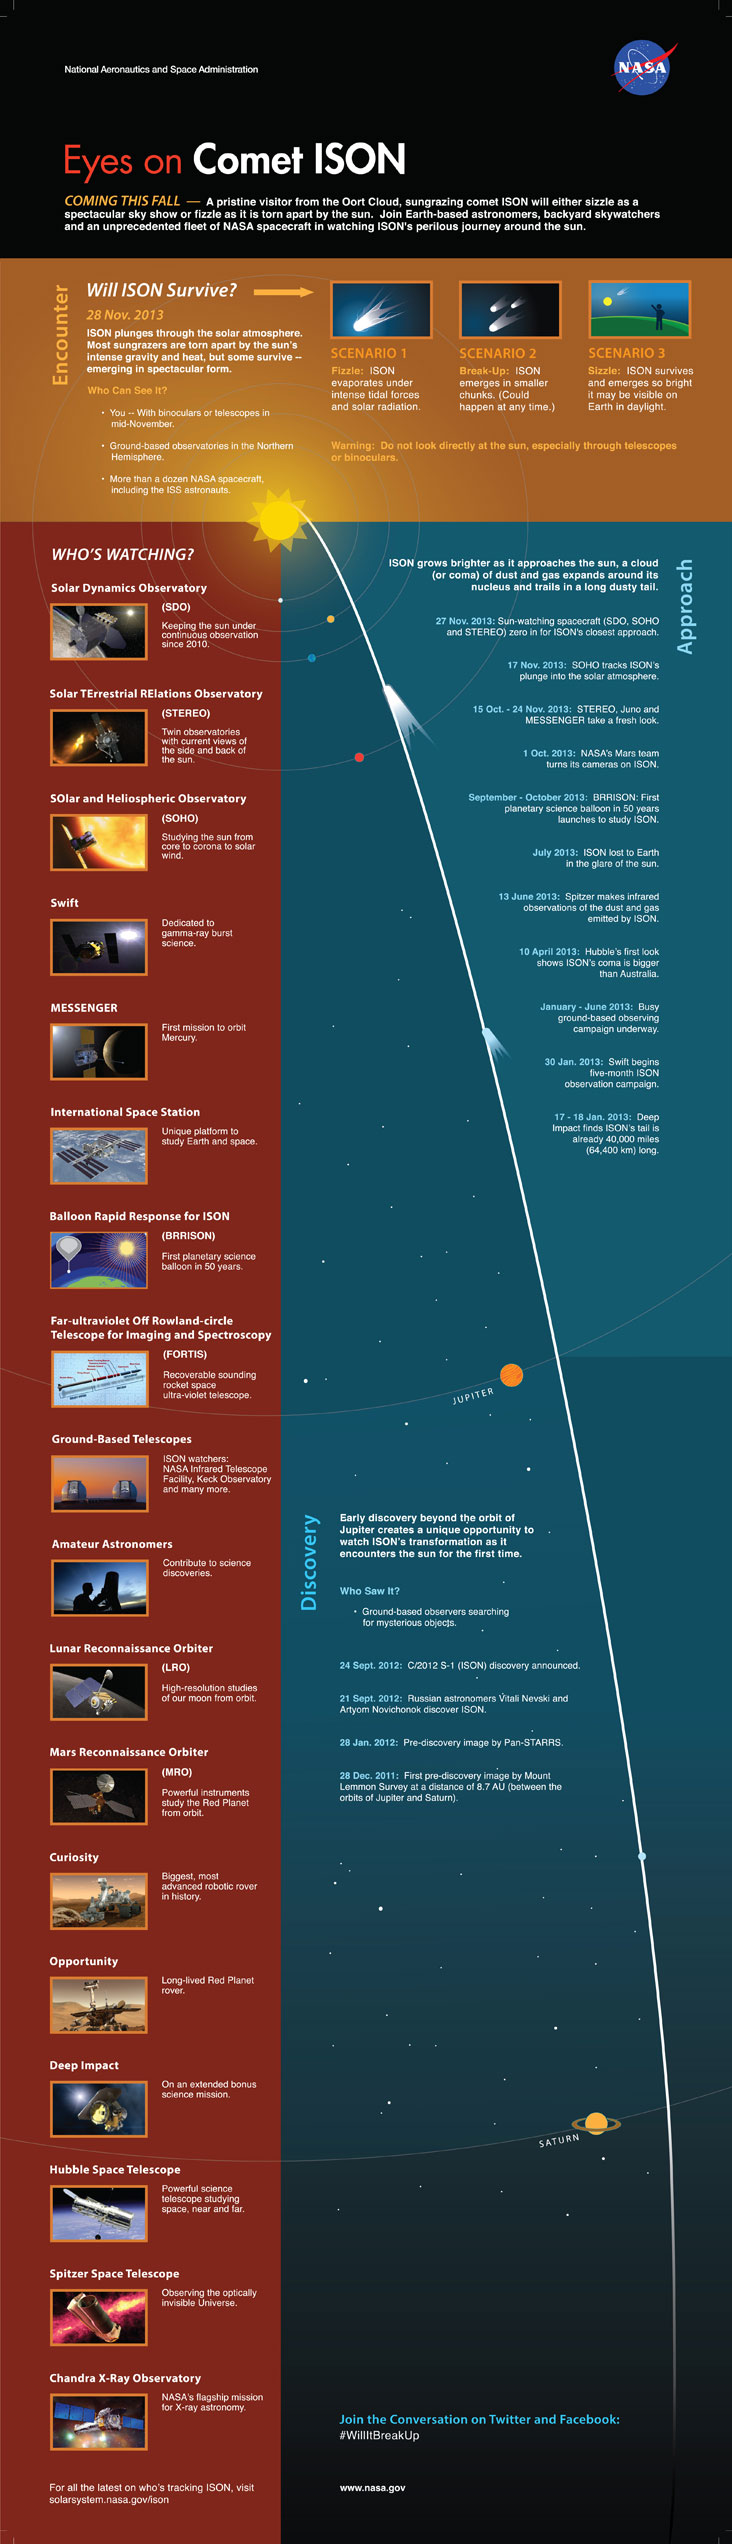 Infographic showing comet ISON's trajectory toward the sun